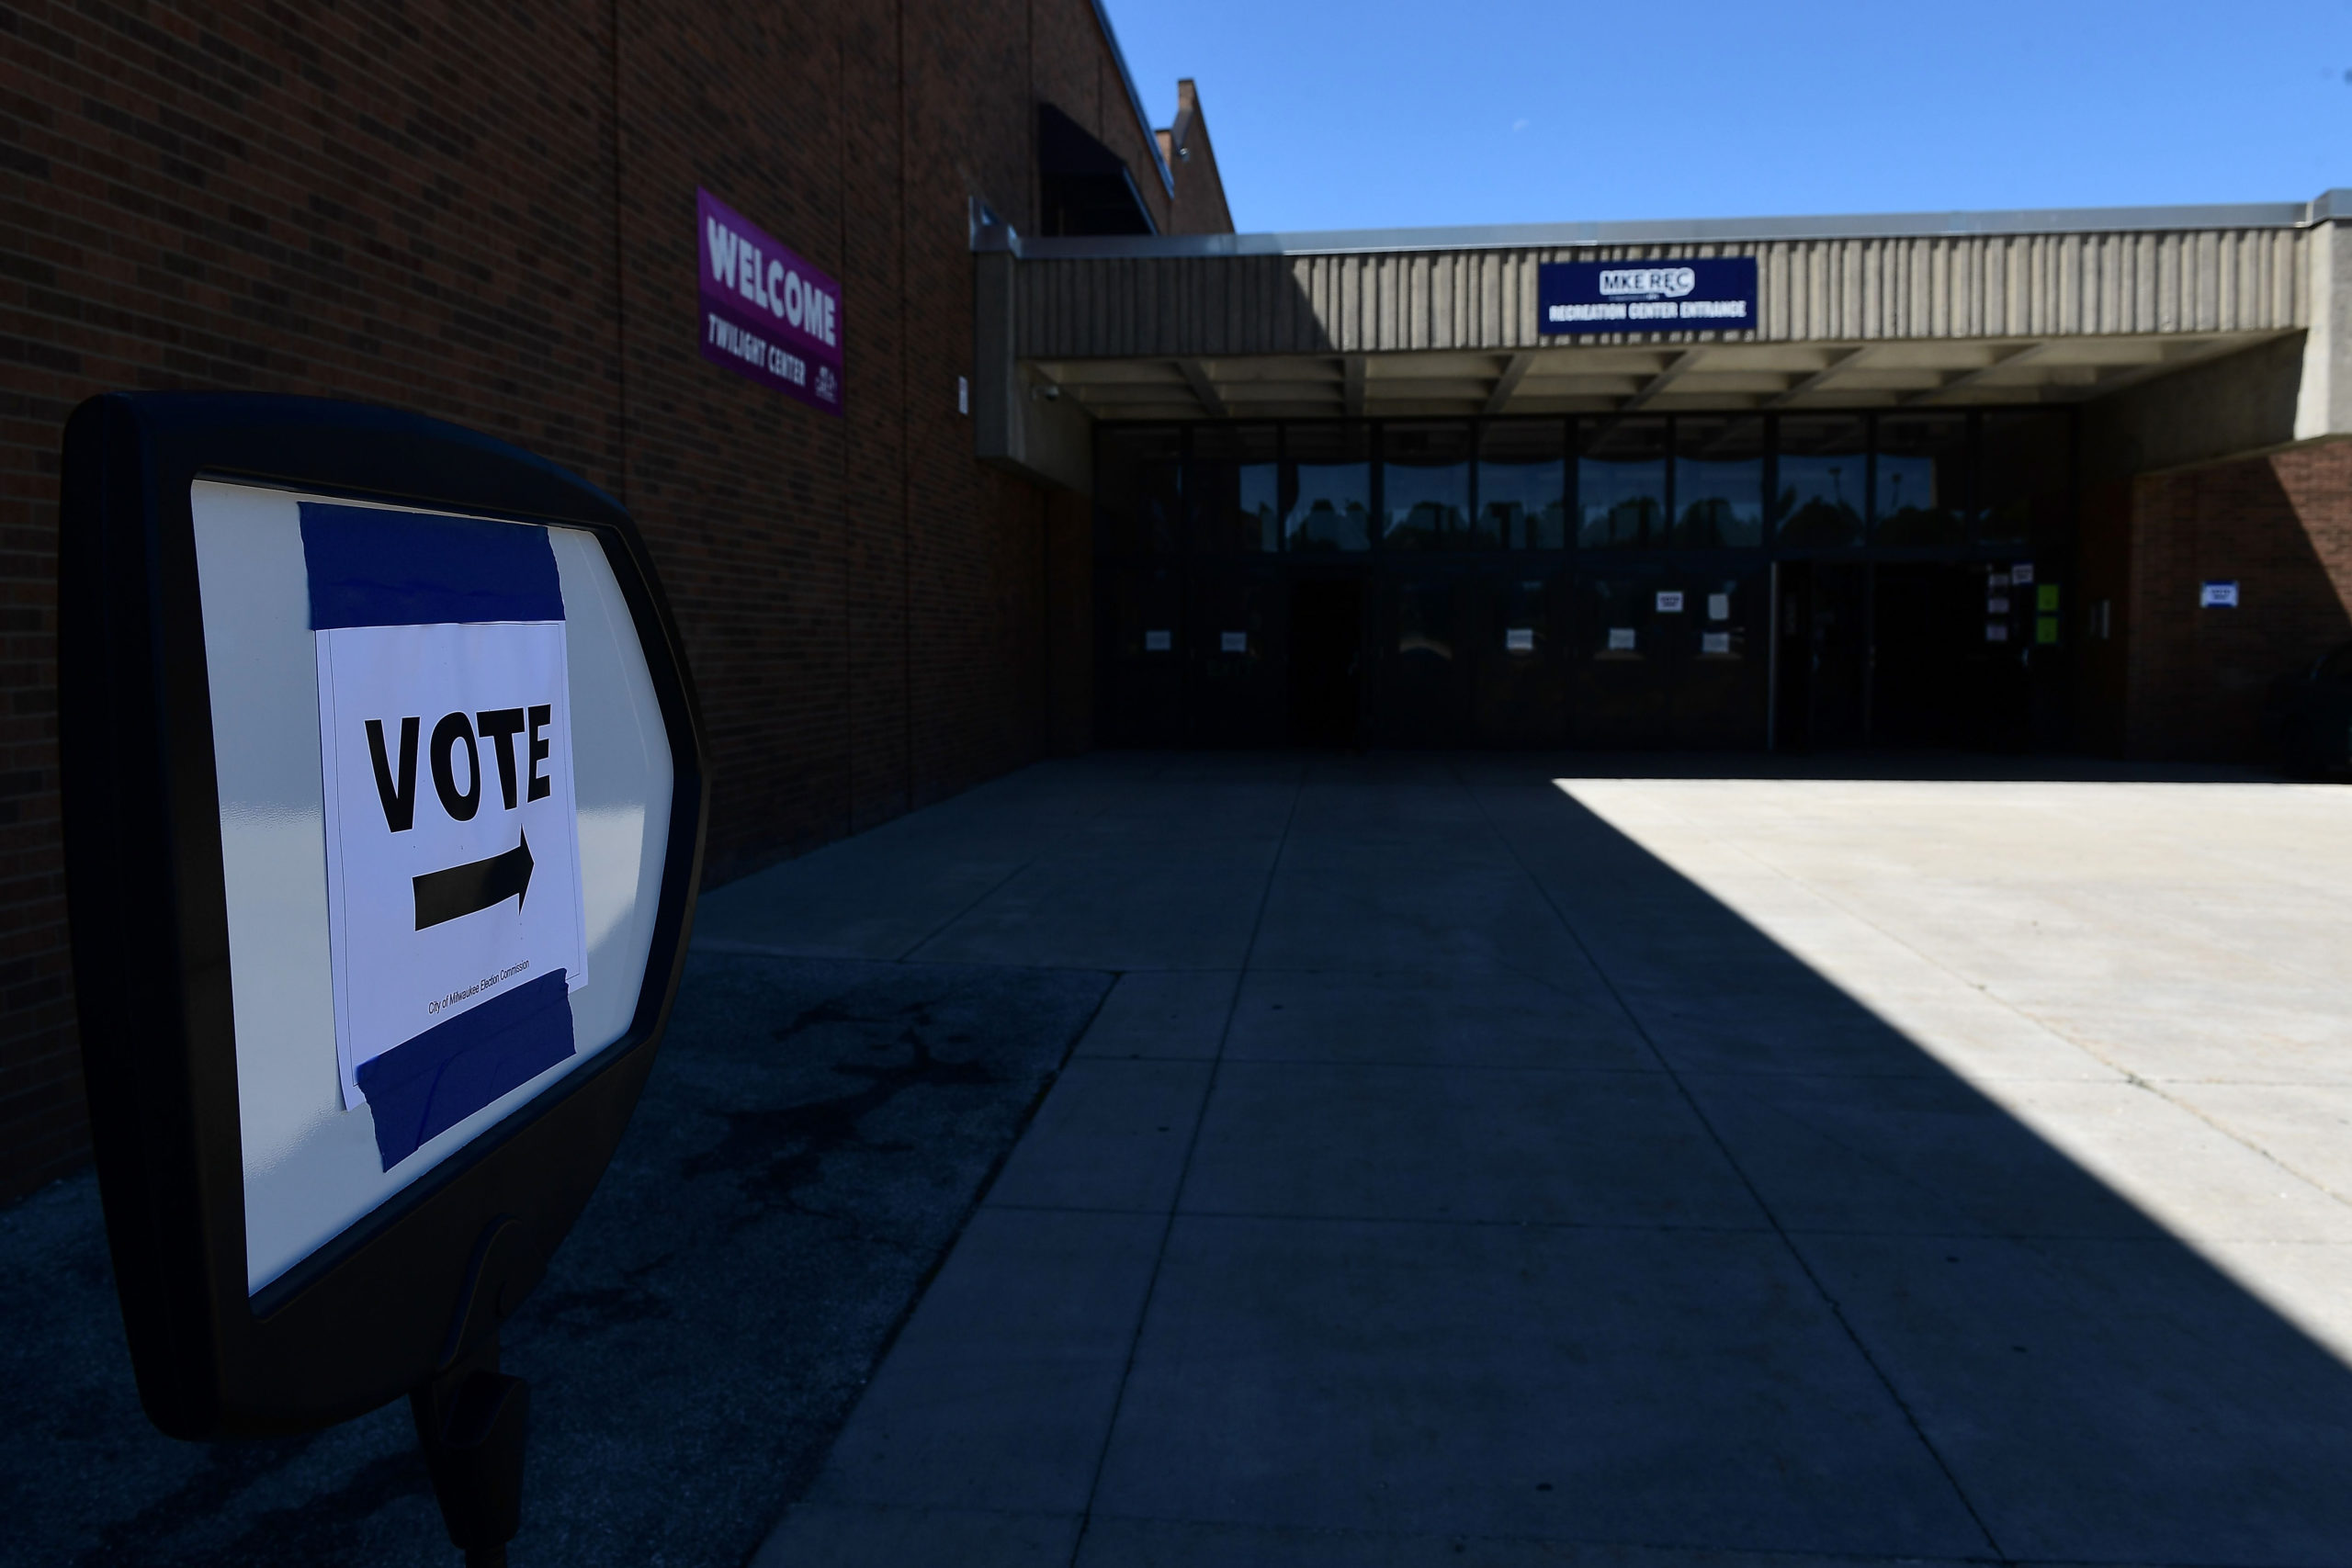 A general view of a voting sign at the South Division High School polling station on August 11, 2020 in Milwaukee, Wisconsin. Residents are casting their votes in the primary for a variety of seats including State Assembly, State Senate and congressional positions. (Photo by Stacy Revere/Getty Images)